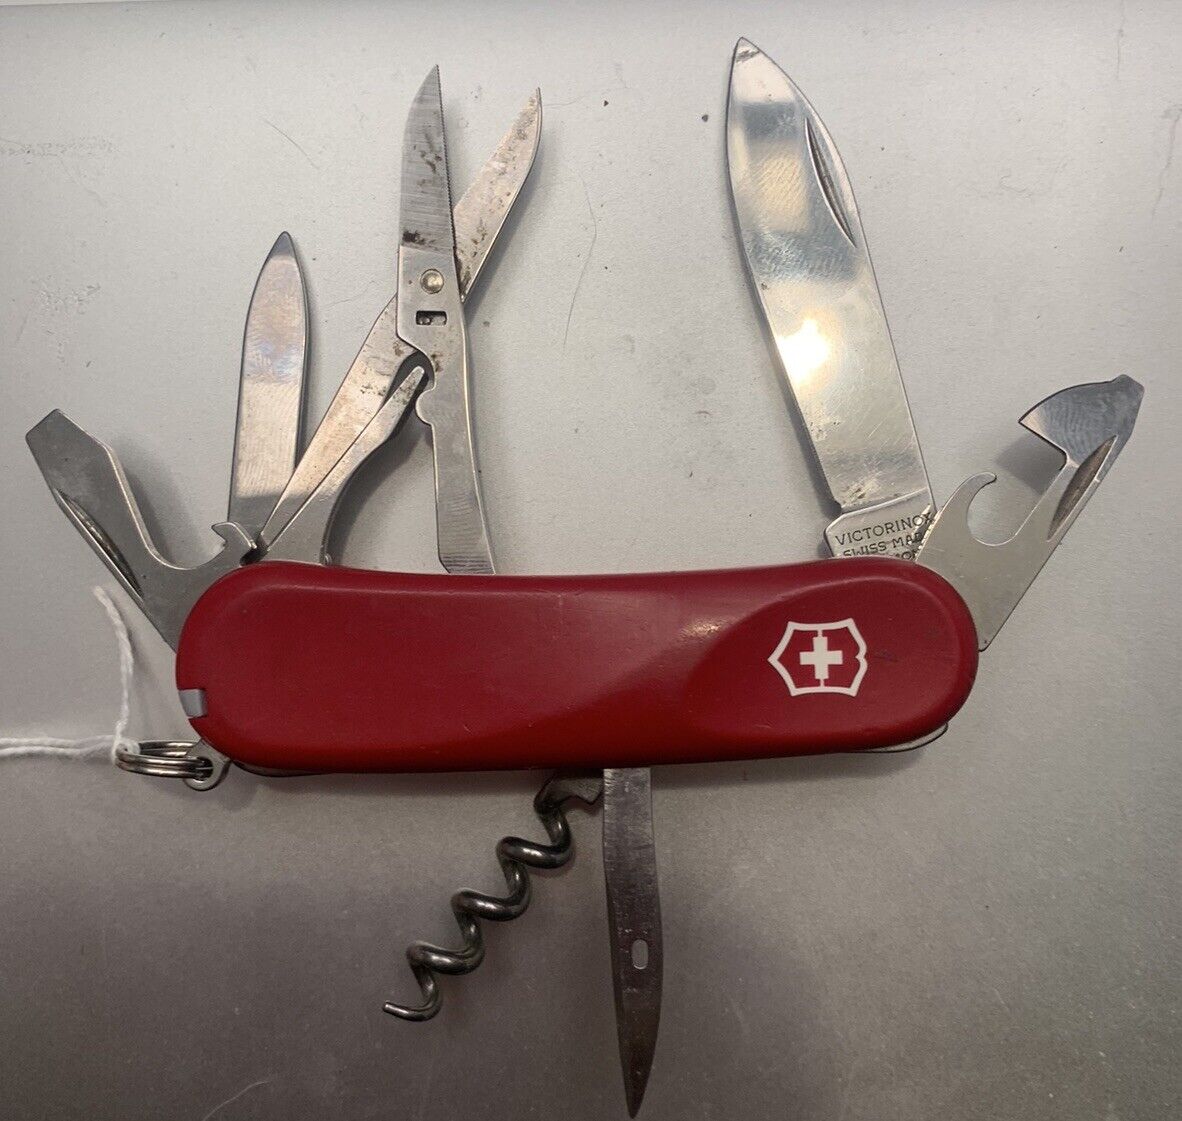 Victorinox Evolution 14 Swiss Army Knife, Delémont, 85mm, Red - NICE